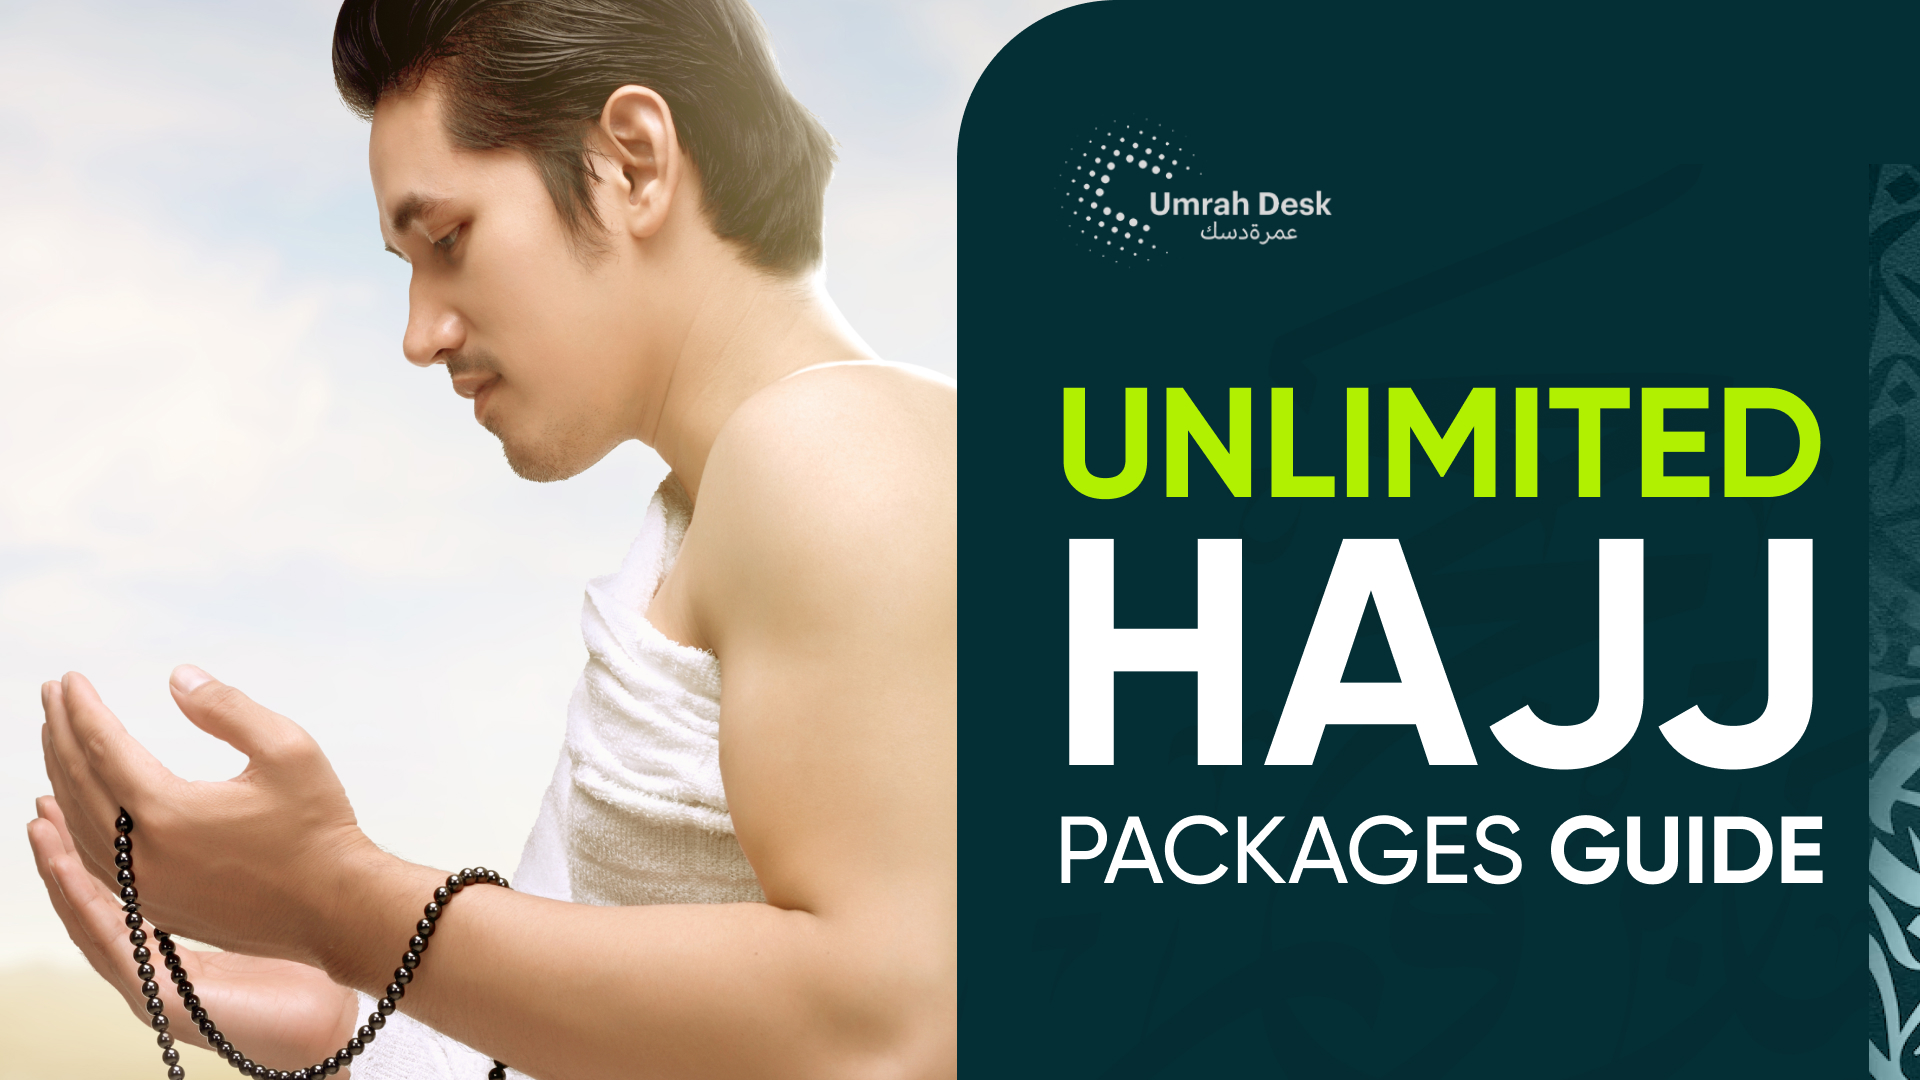 Unlimited Hajj Packages